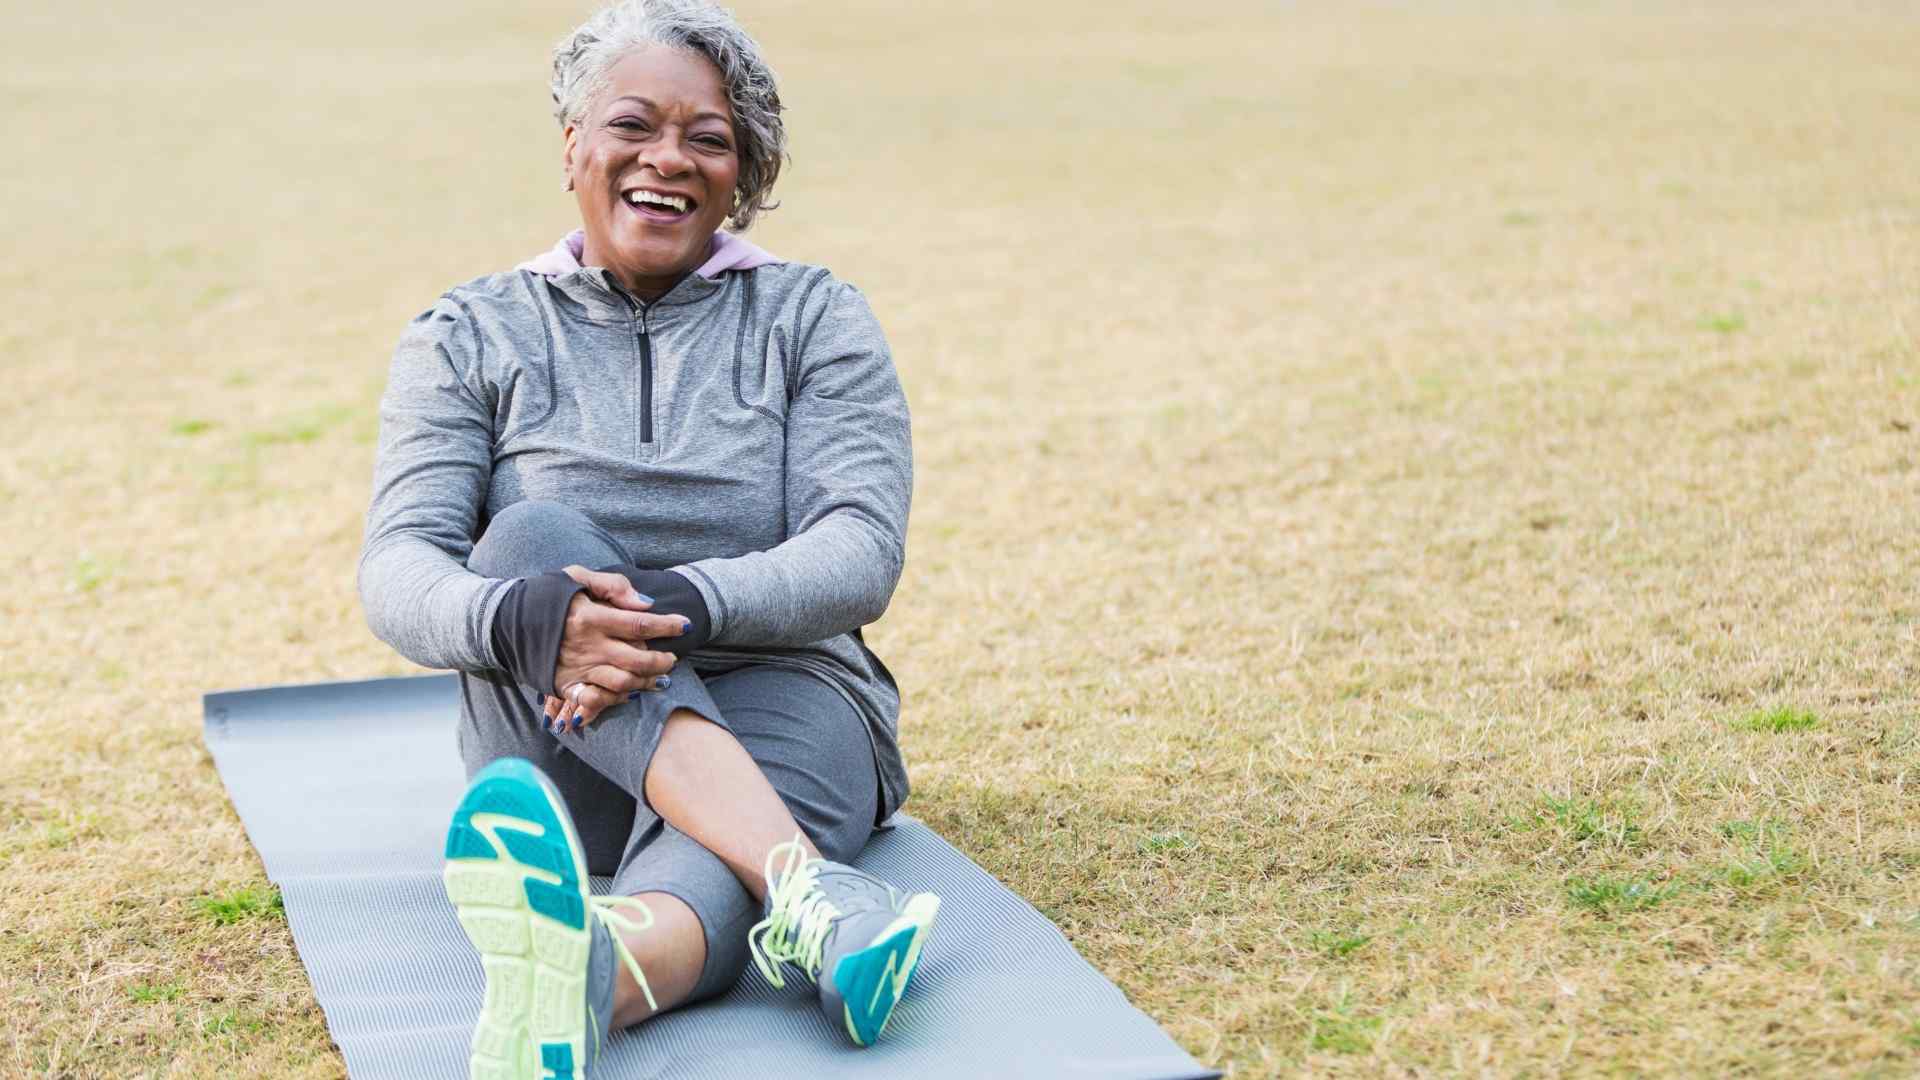 Exercise to reduce joint pain and increase mobility